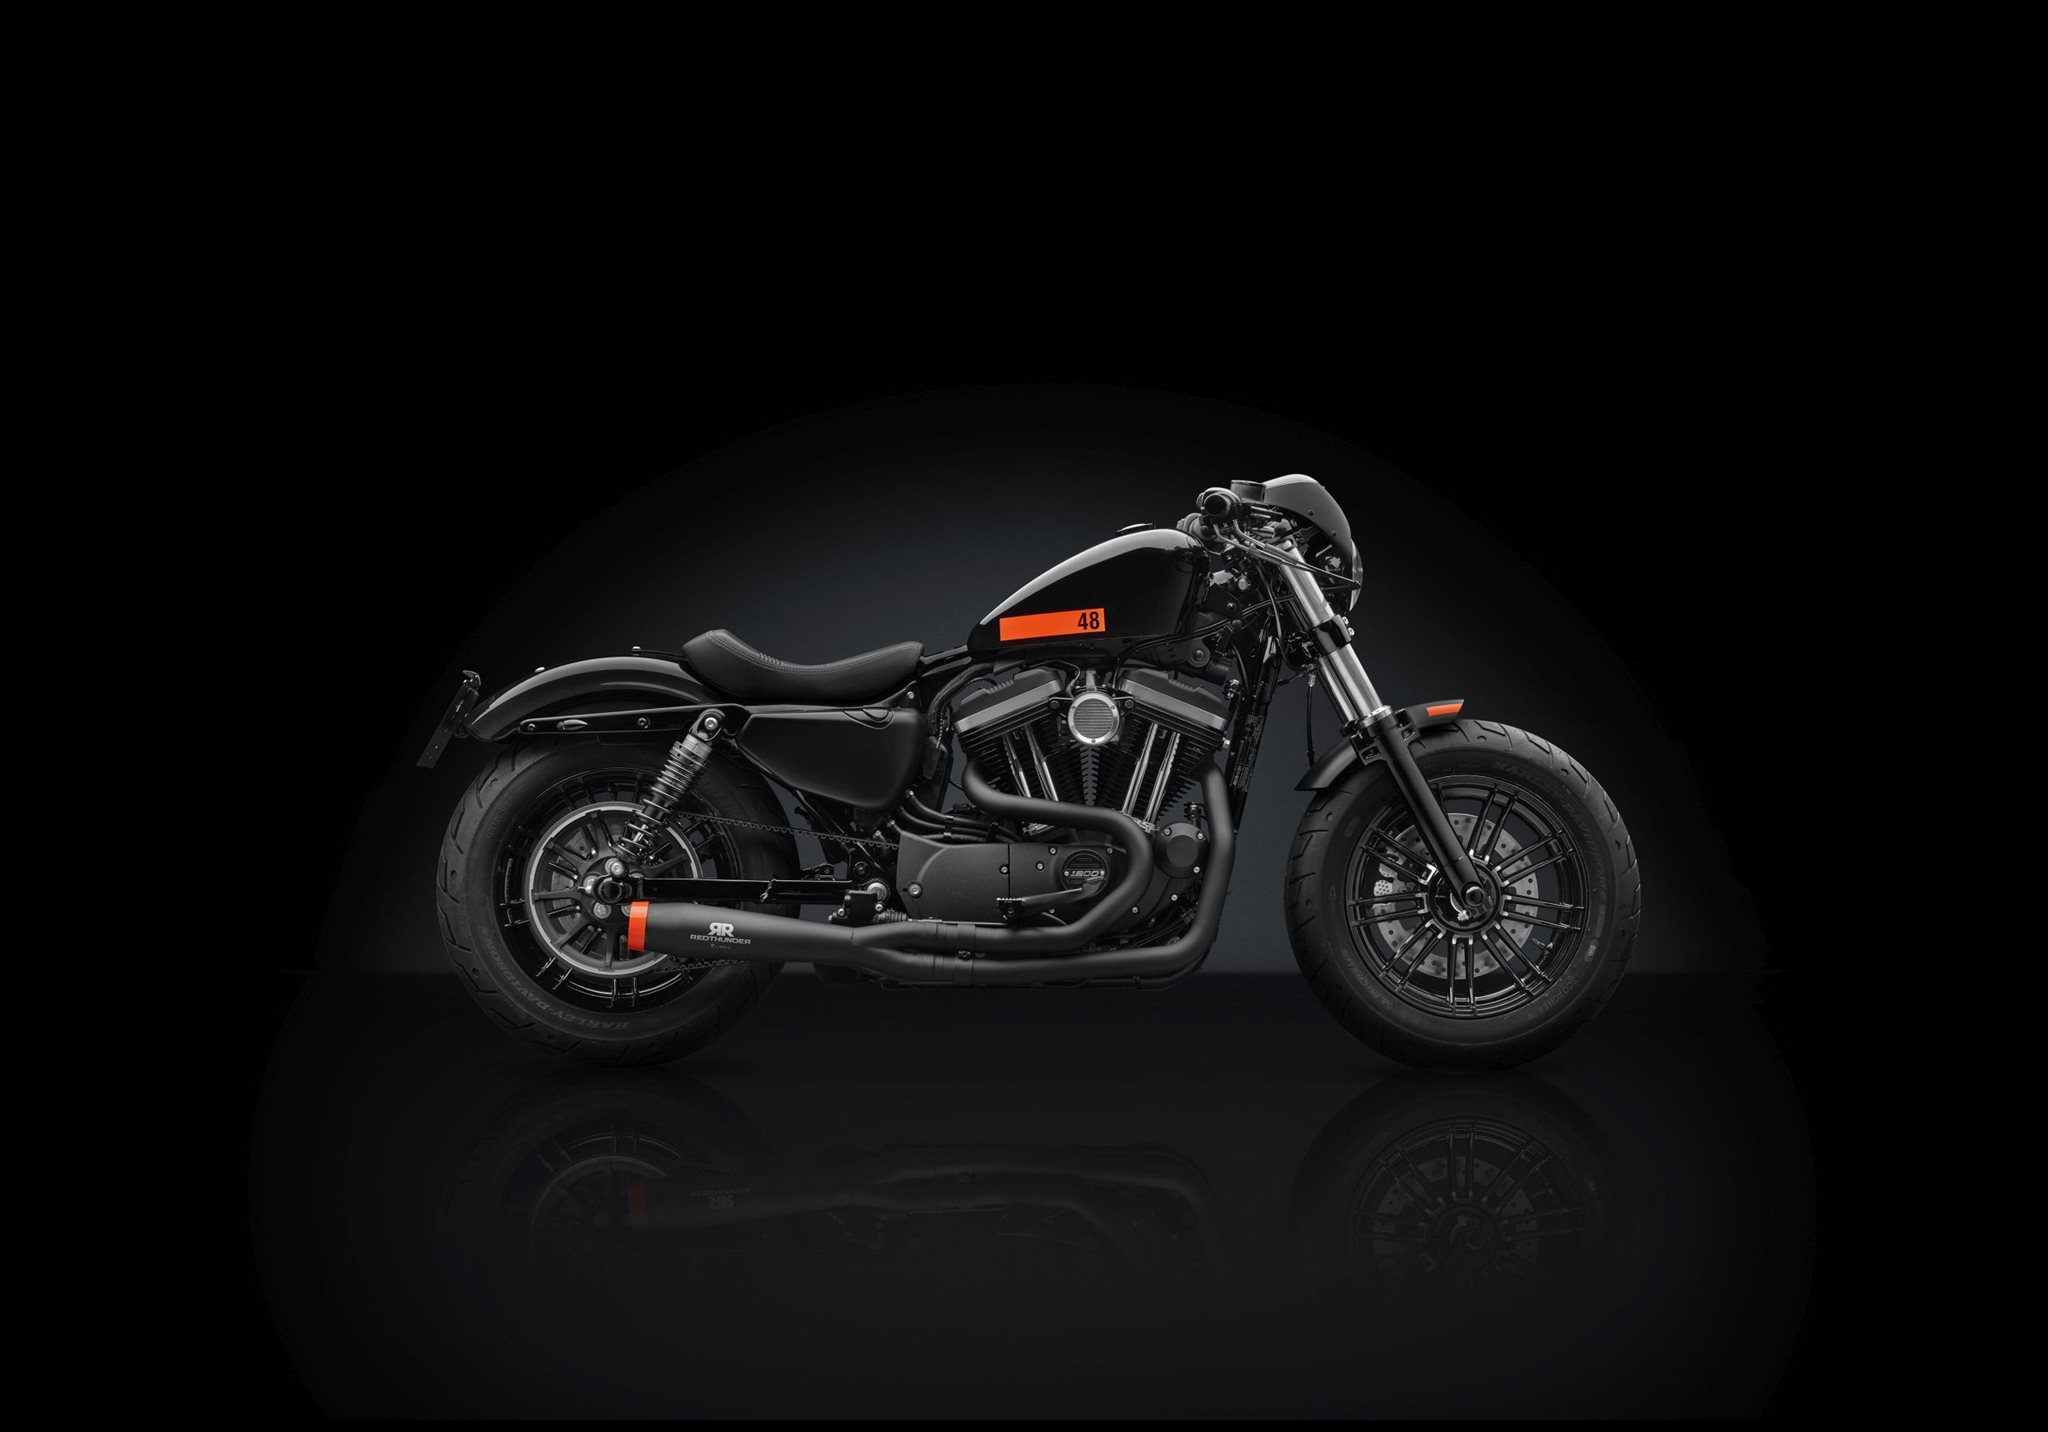 https://images5.1000ps.net/b-f_W3005822-rizoma-zubehoer-fuer-die-harley-davidson-sportster-forty-eight-636994103343568618.jpg